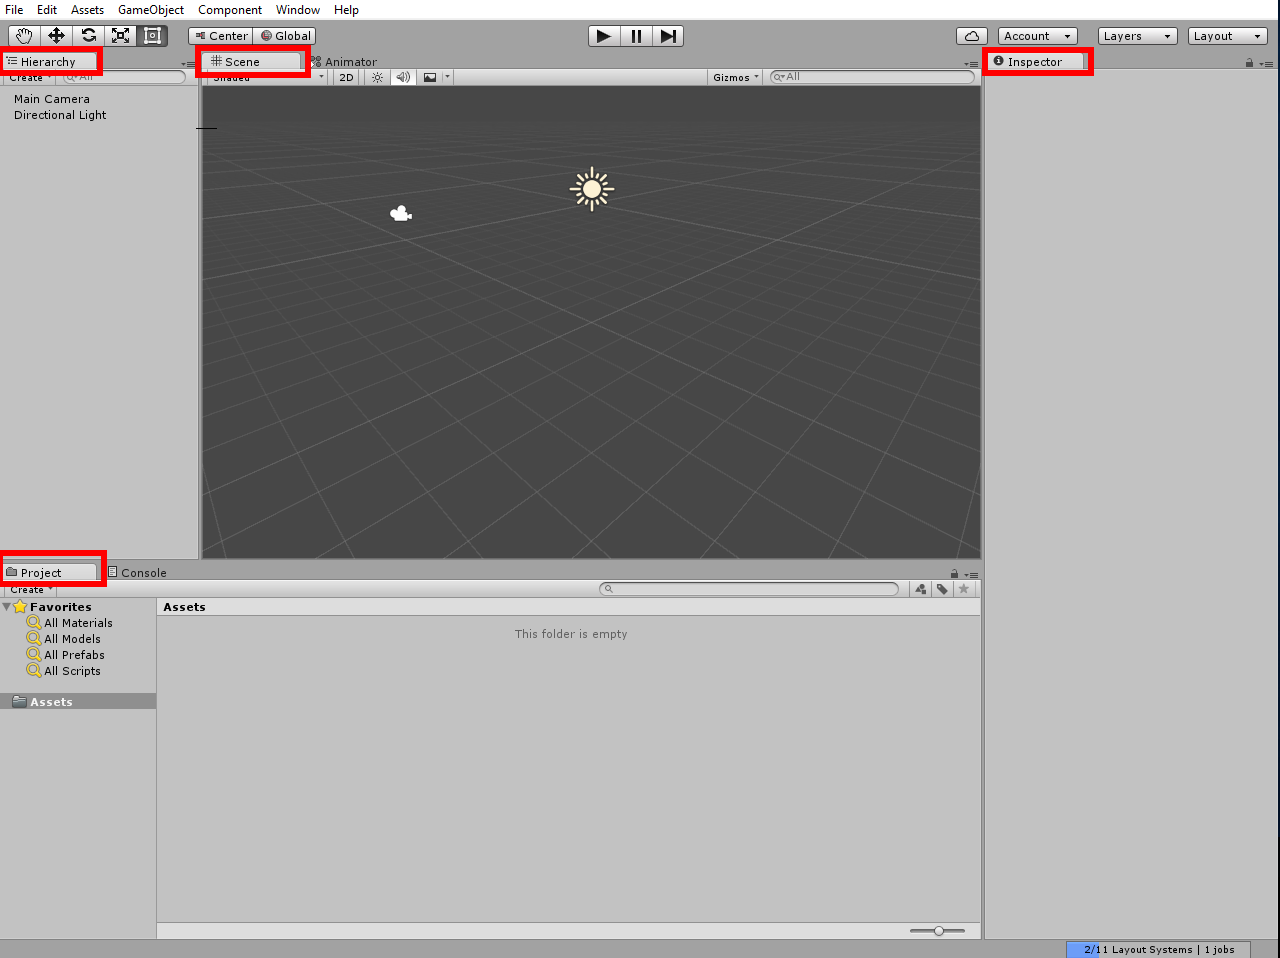 Default layout of the Unity interface.